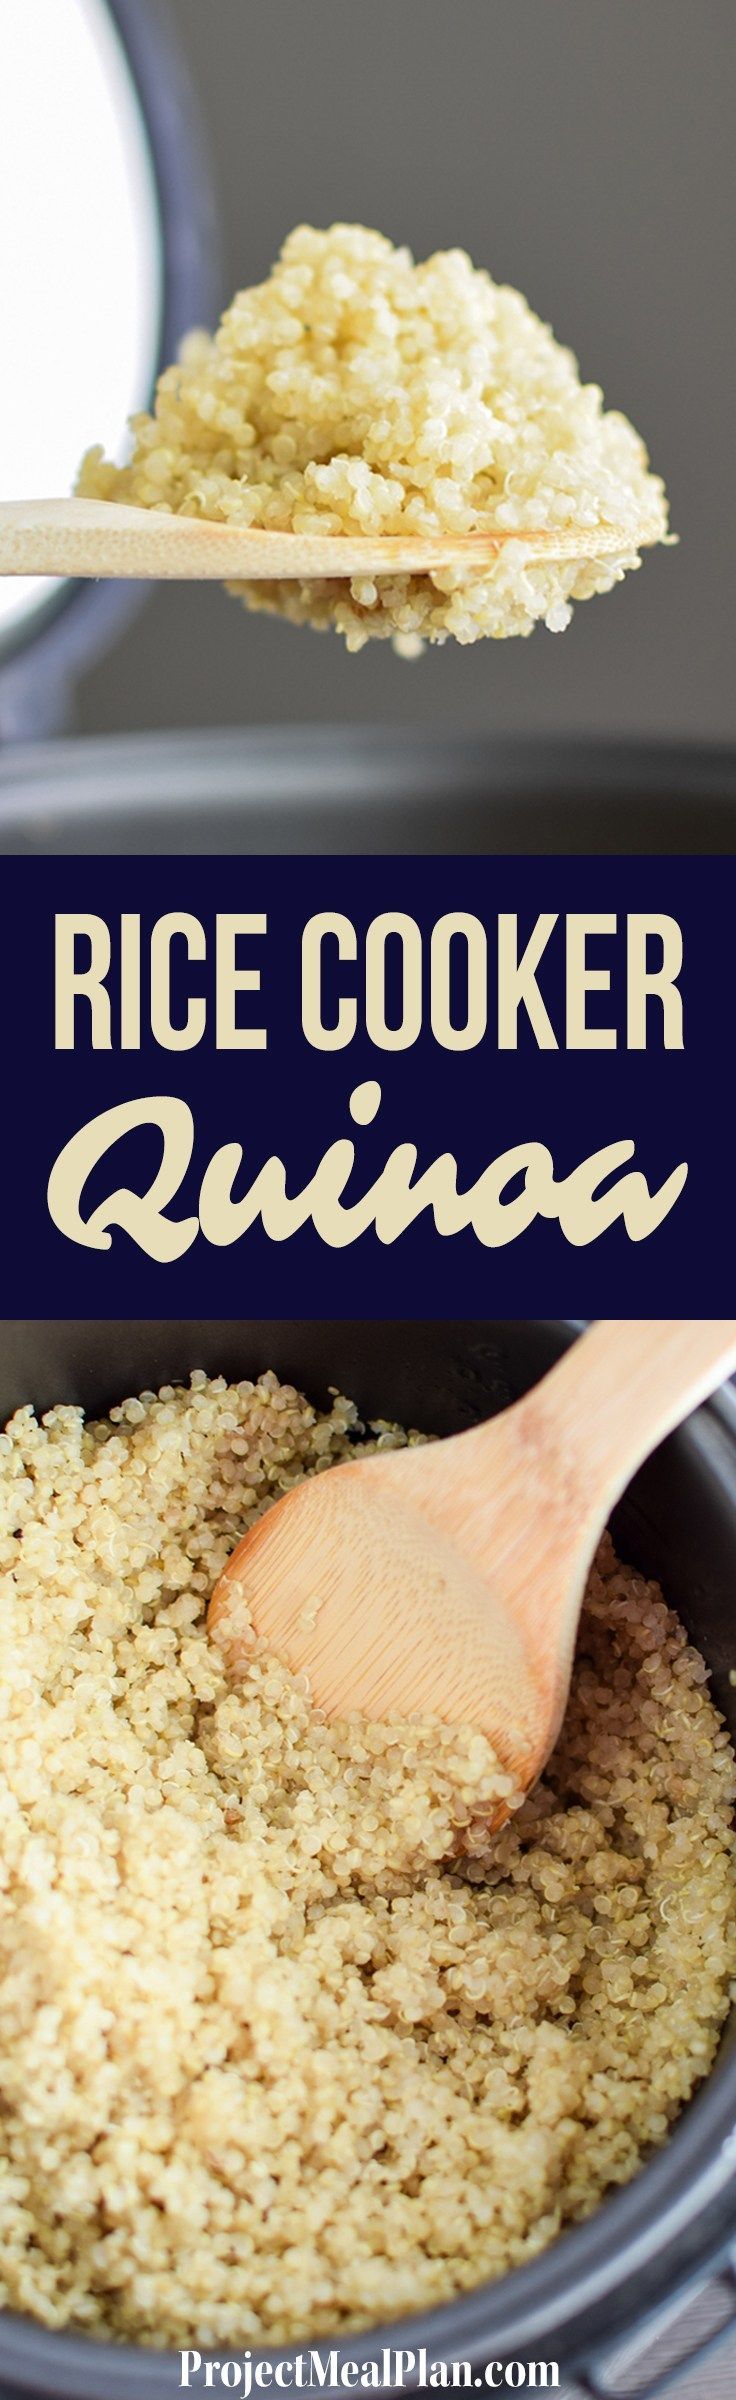 How to Cook Quinoa in the Rice Cooker – A simple explanation of how to make the EASIEST quinoa ever, in your rice cooker! –